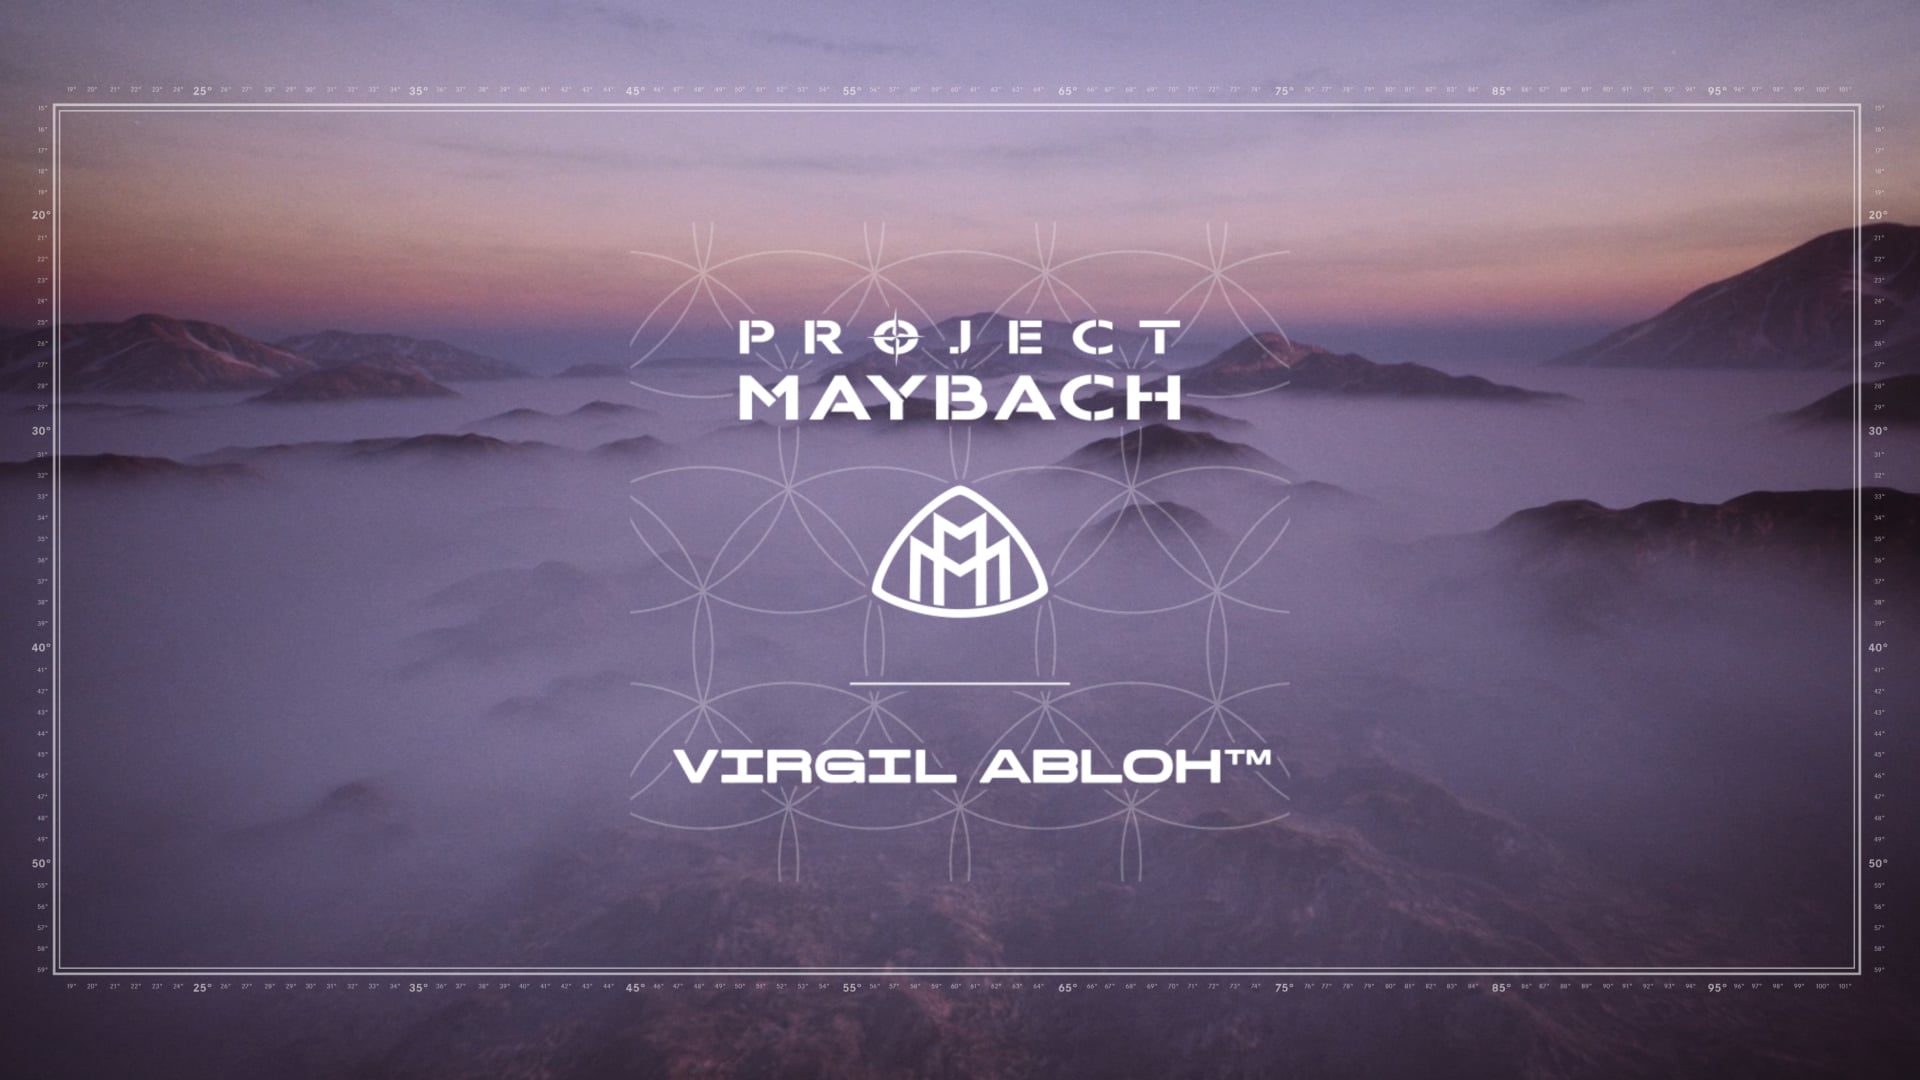 METCHA  Mercedes-Benz x Virgil Abloh's Project Maybach.